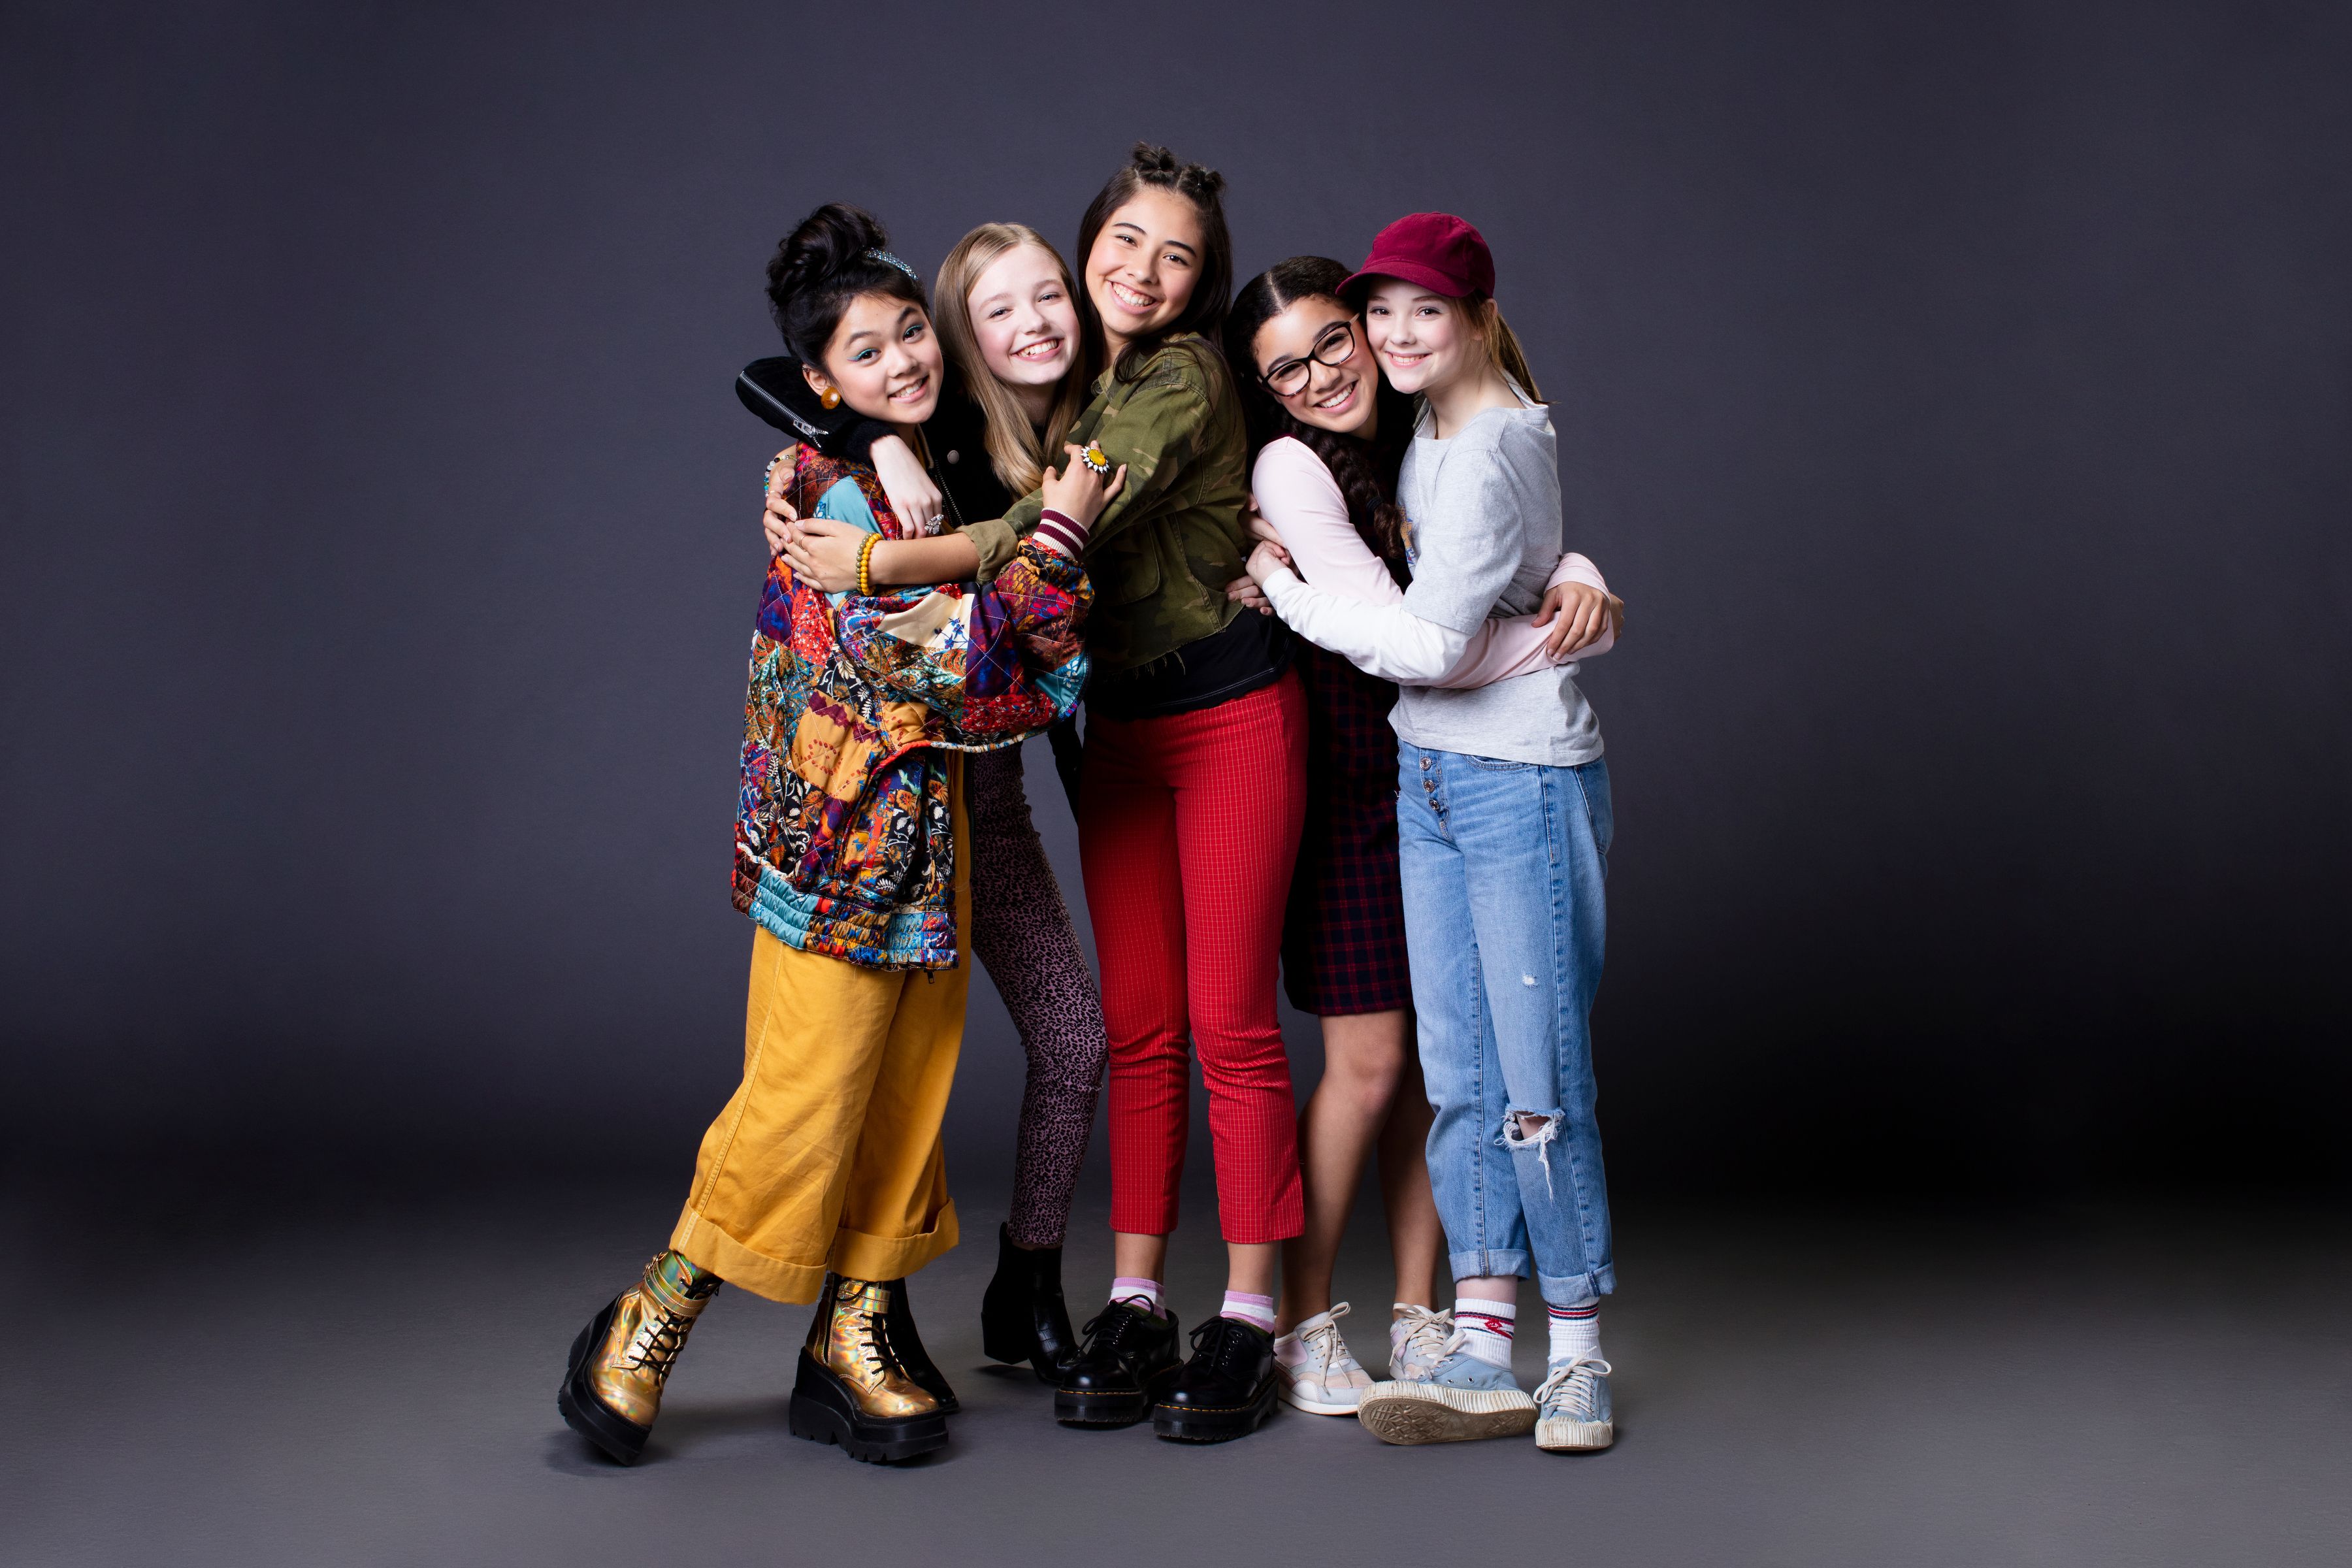 Exclusive: Meet the Cast of Netflix's "The Baby-Sitters Club" - Who are the Characters in Netflix's "The Baby-Sitters Club"